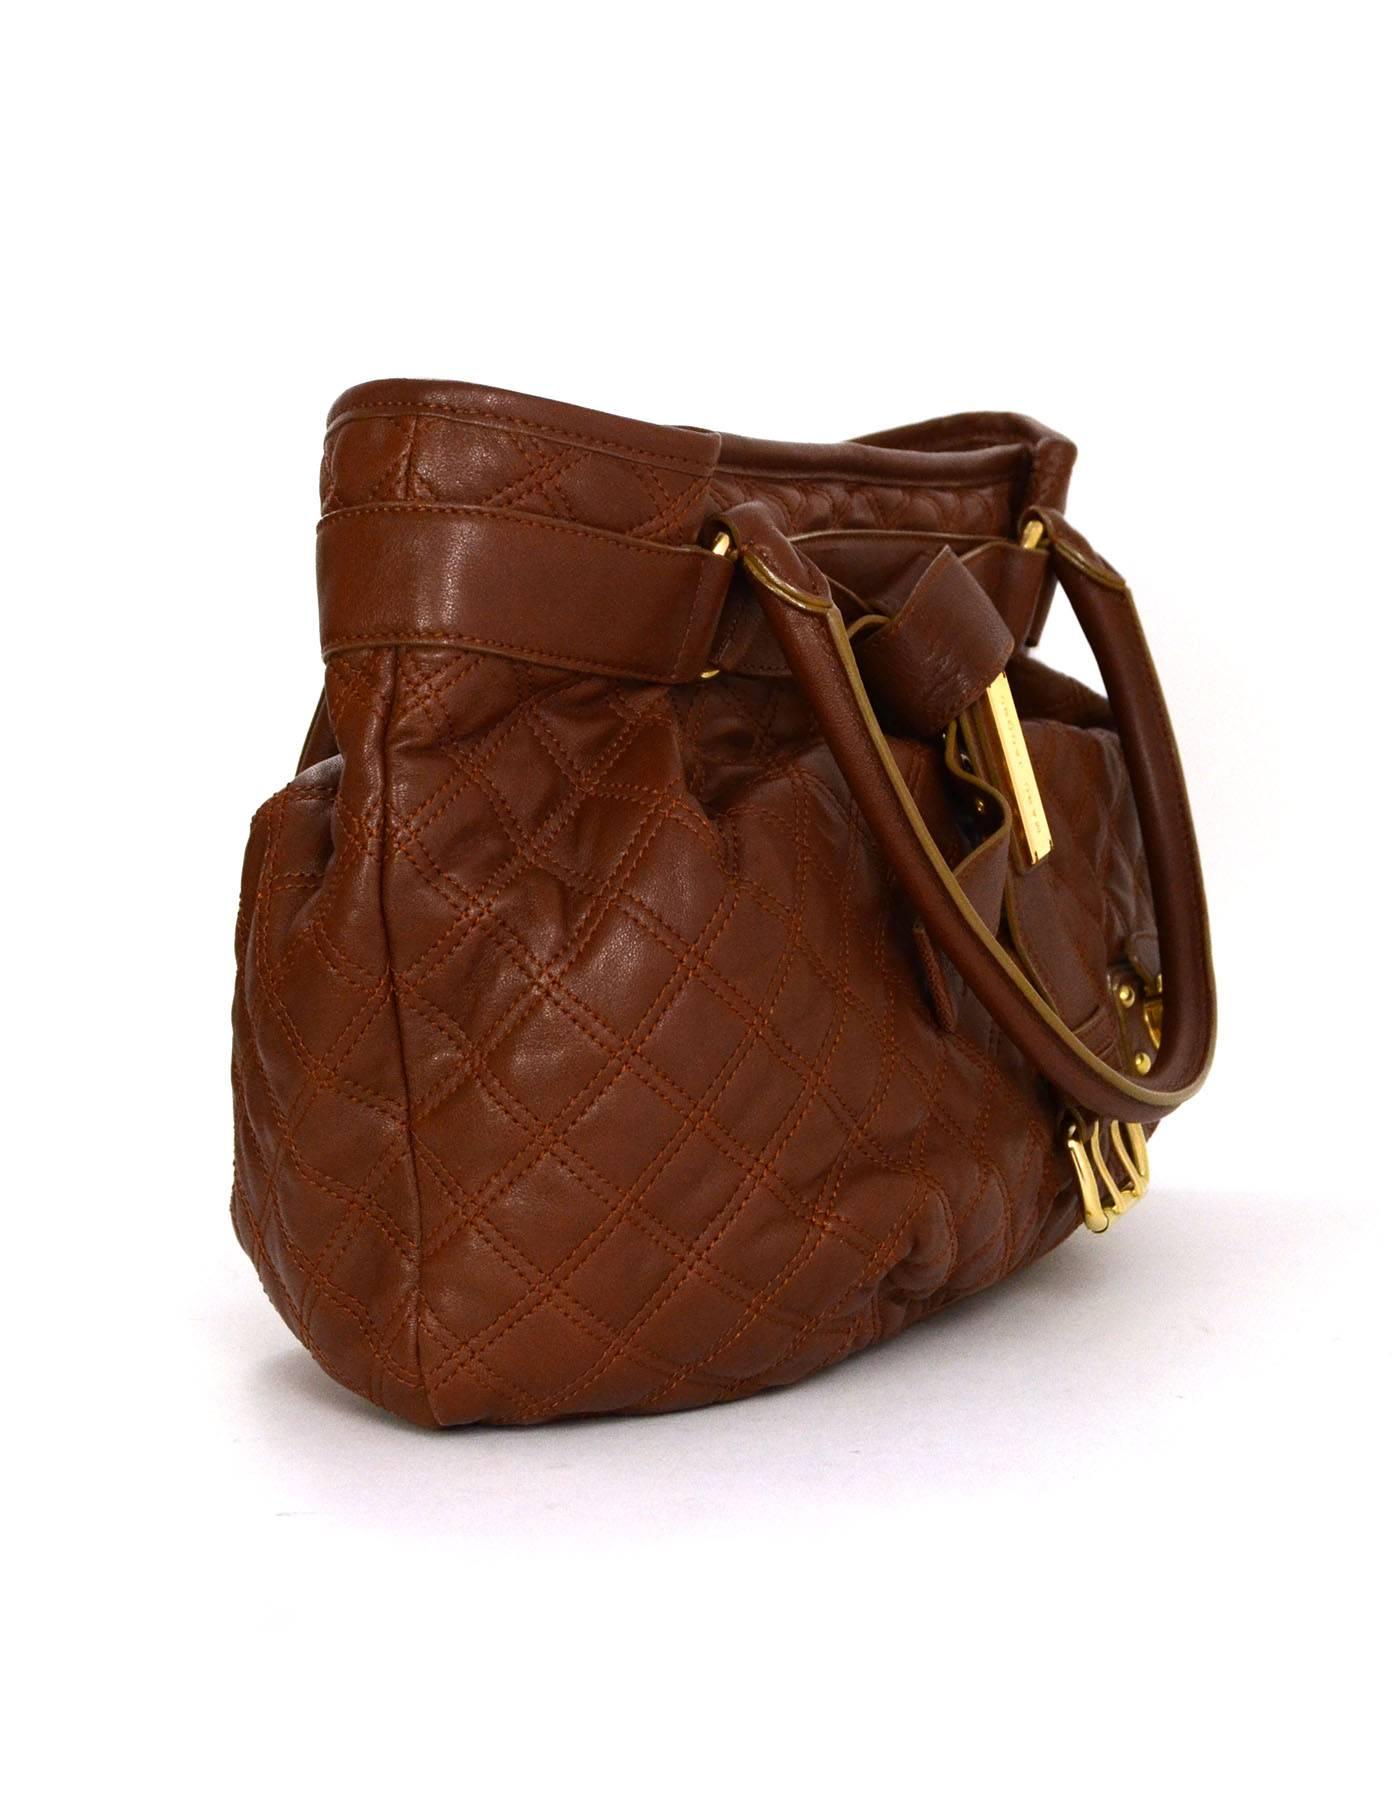 Marc Jacobs Brown Quilted Leather Linda Tote
Features knotted leather sash/strap around top of bag with Marc Jacobs name place
Made In: Italy
Color: Brown
Hardware: Goldtone
Materials: Leather 
Lining: Grey textile
Closure/Opening: Zip across